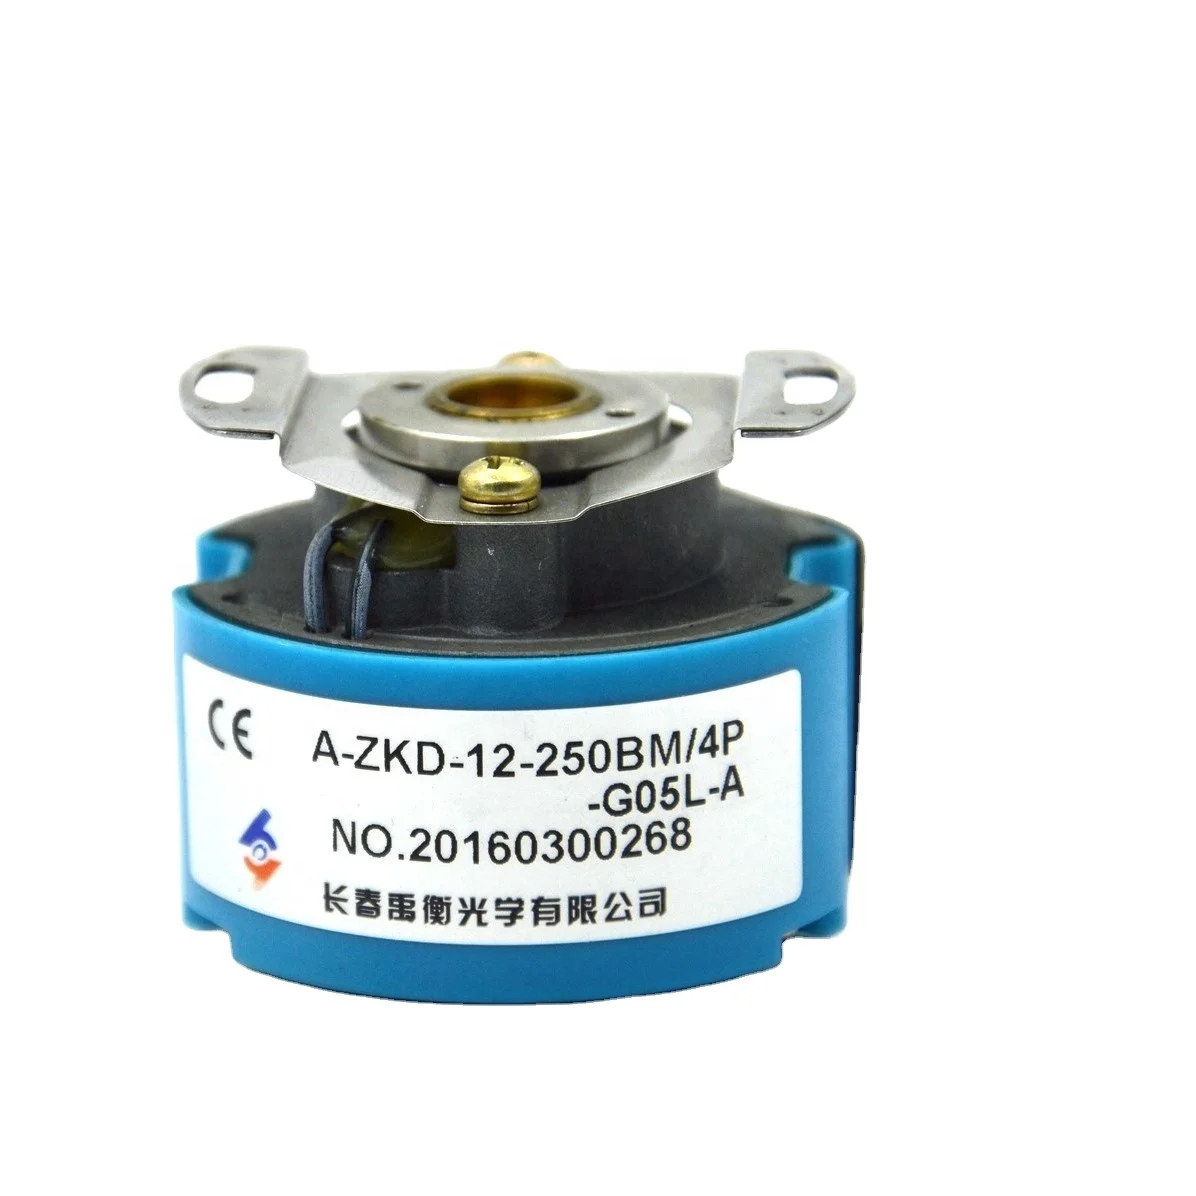 

A-ZKD-12J-250BM/4P-G05L-A-0.19M YUHENG Hollow shaft servo motor encoder New original genuine goods are available from stock